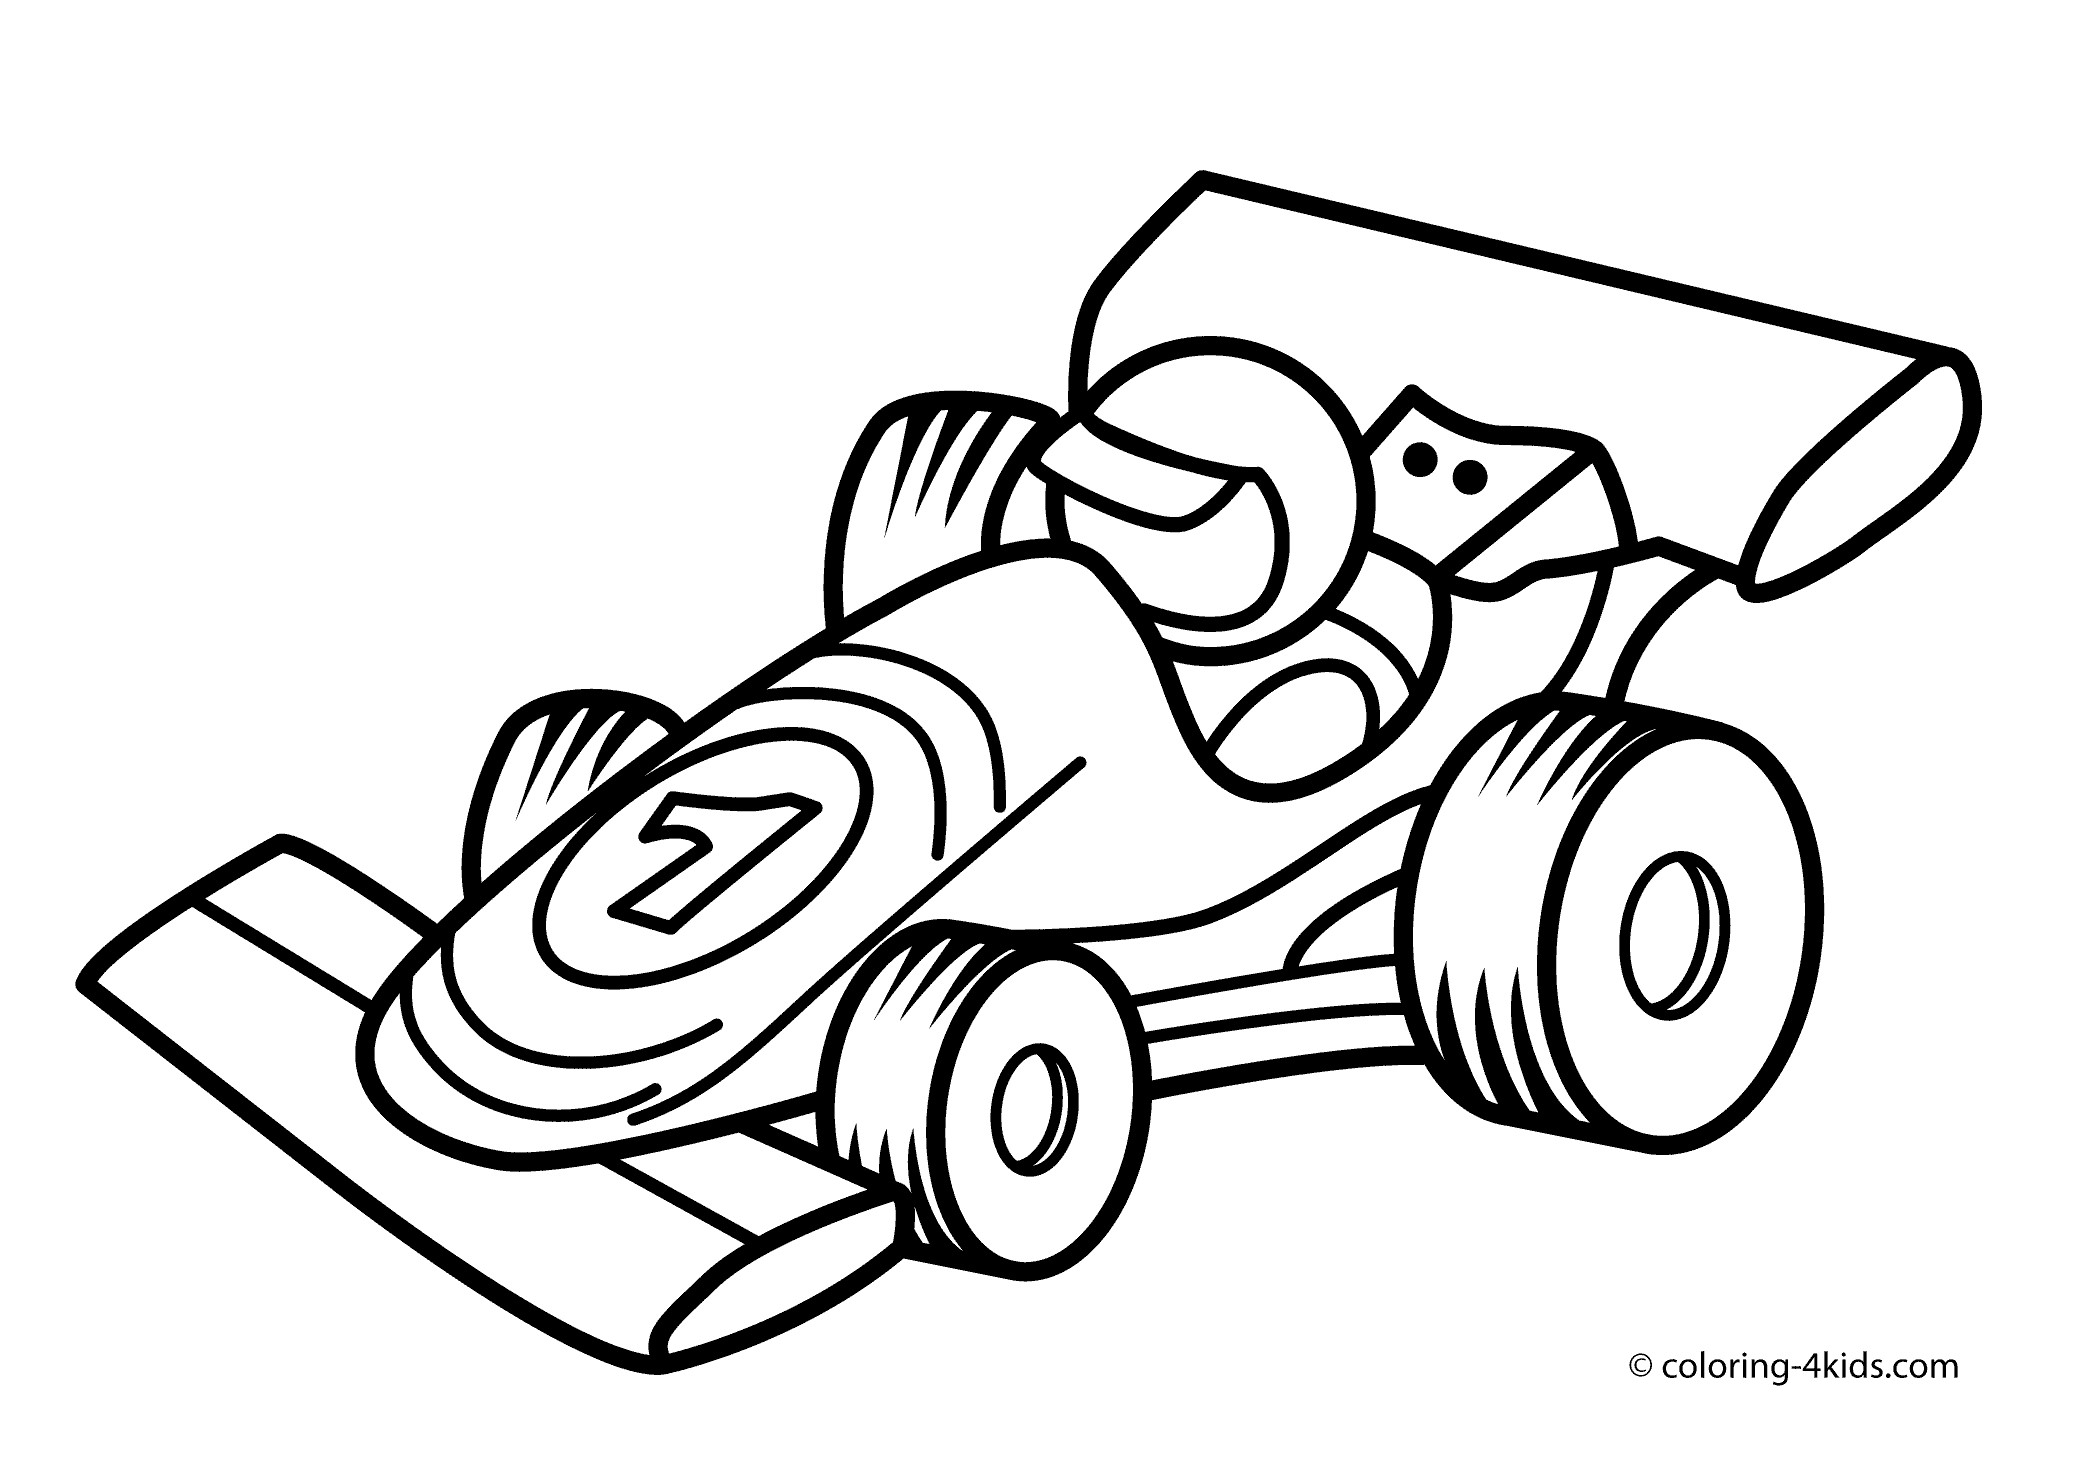 Car Coloring Pages For Toddlers
 Racing car transportation coloring pages for kids